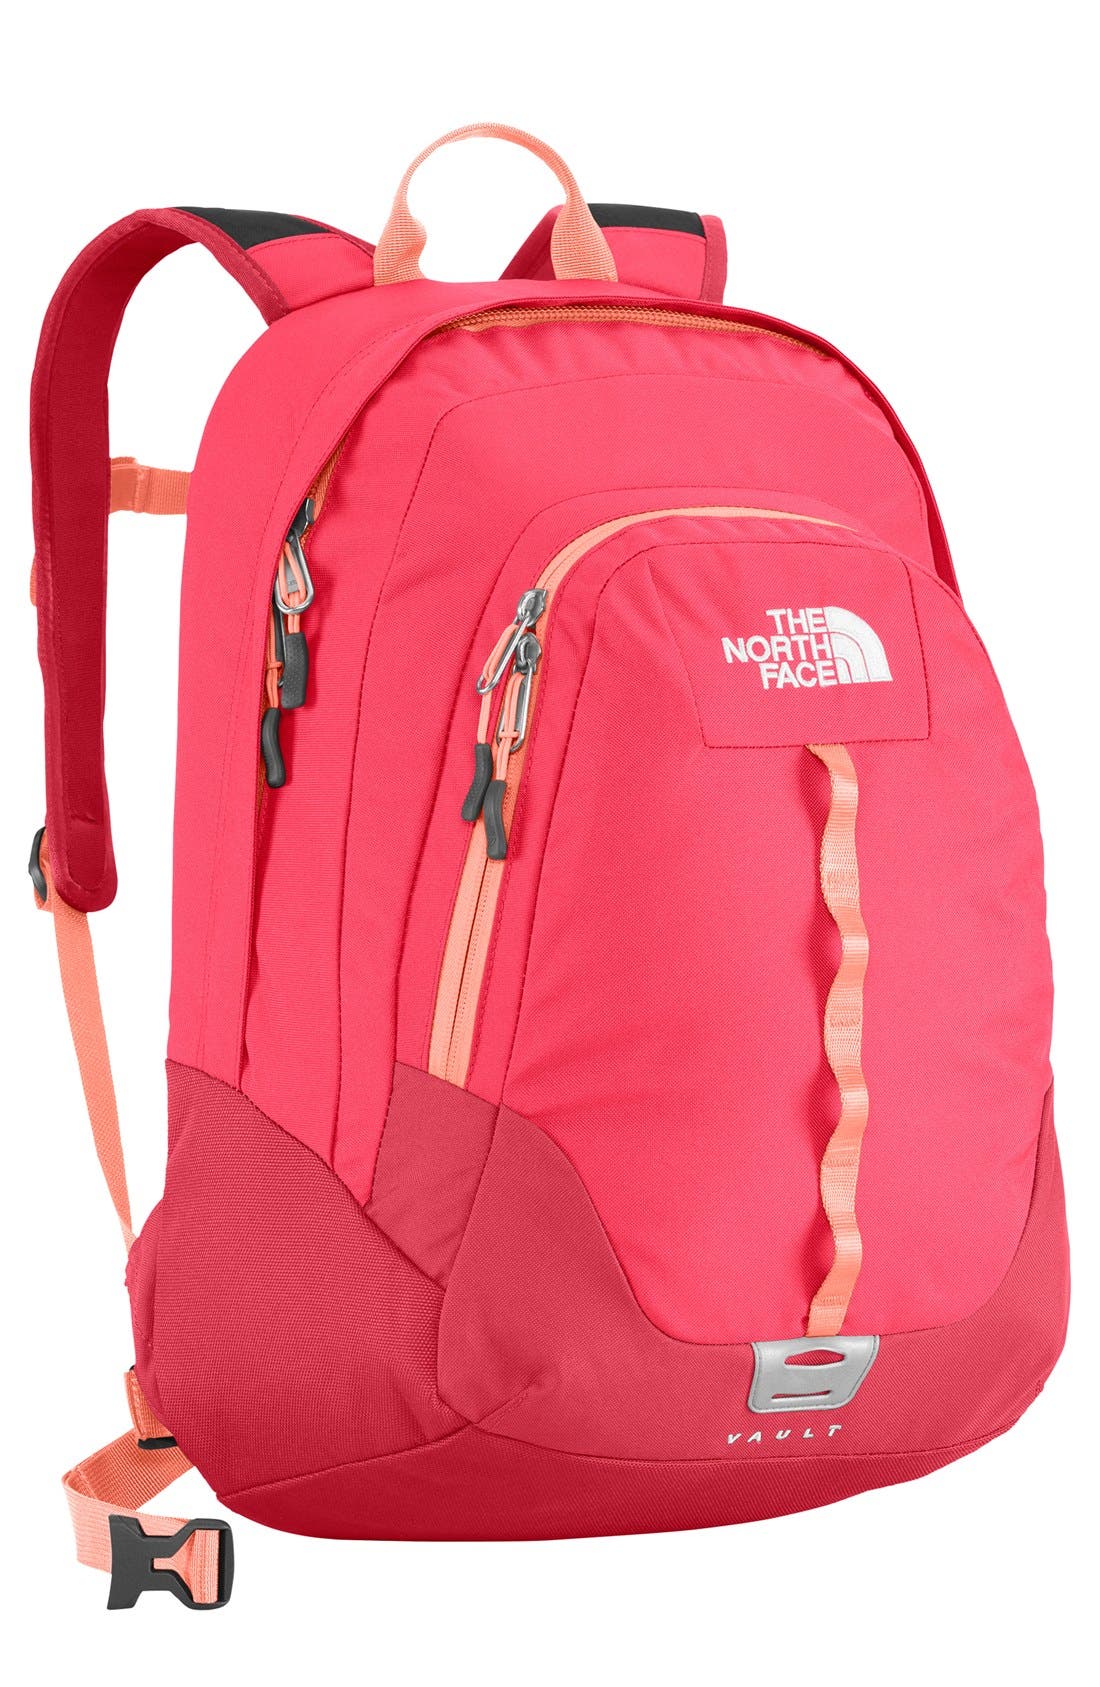 north face childrens backpack